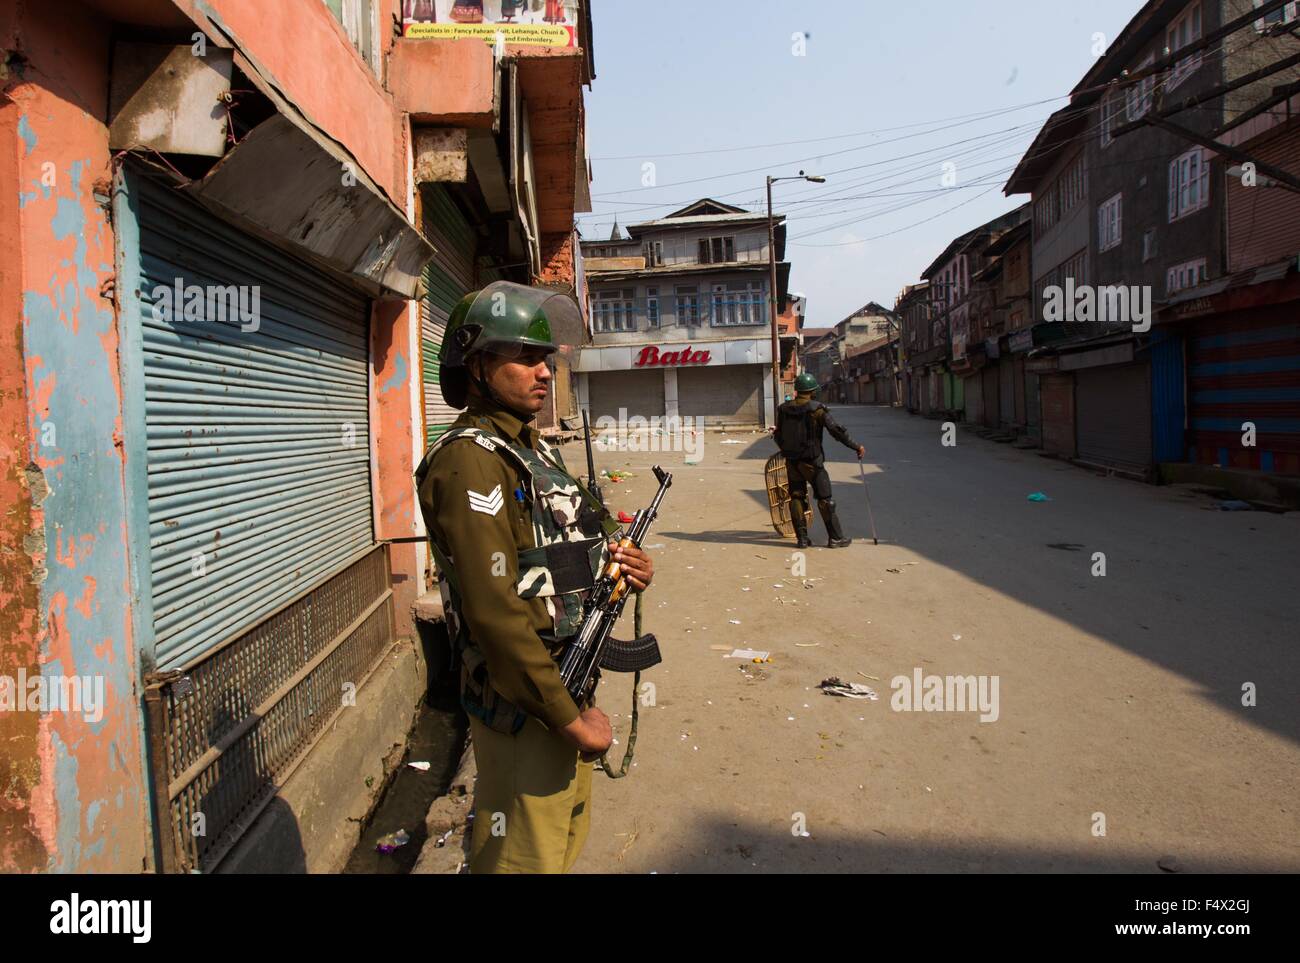 Srinagar, Indian-controlled Kashmir. 23rd Oct, 2015. An Indian paramilitary soldier stands guard in a closed market during restrictions in old city of Srinagar, summer capital of Indian-controlled Kashmir, Oct. 23, 2015. The authorities on Friday imposed strict restrictions in several areas of restive Indian controlled Kashmir to disallow protest programme of separatist leaders and prevent clashes over killing of a trucker. Credit:  Javed Dar/Xinhua/Alamy Live News Stock Photo